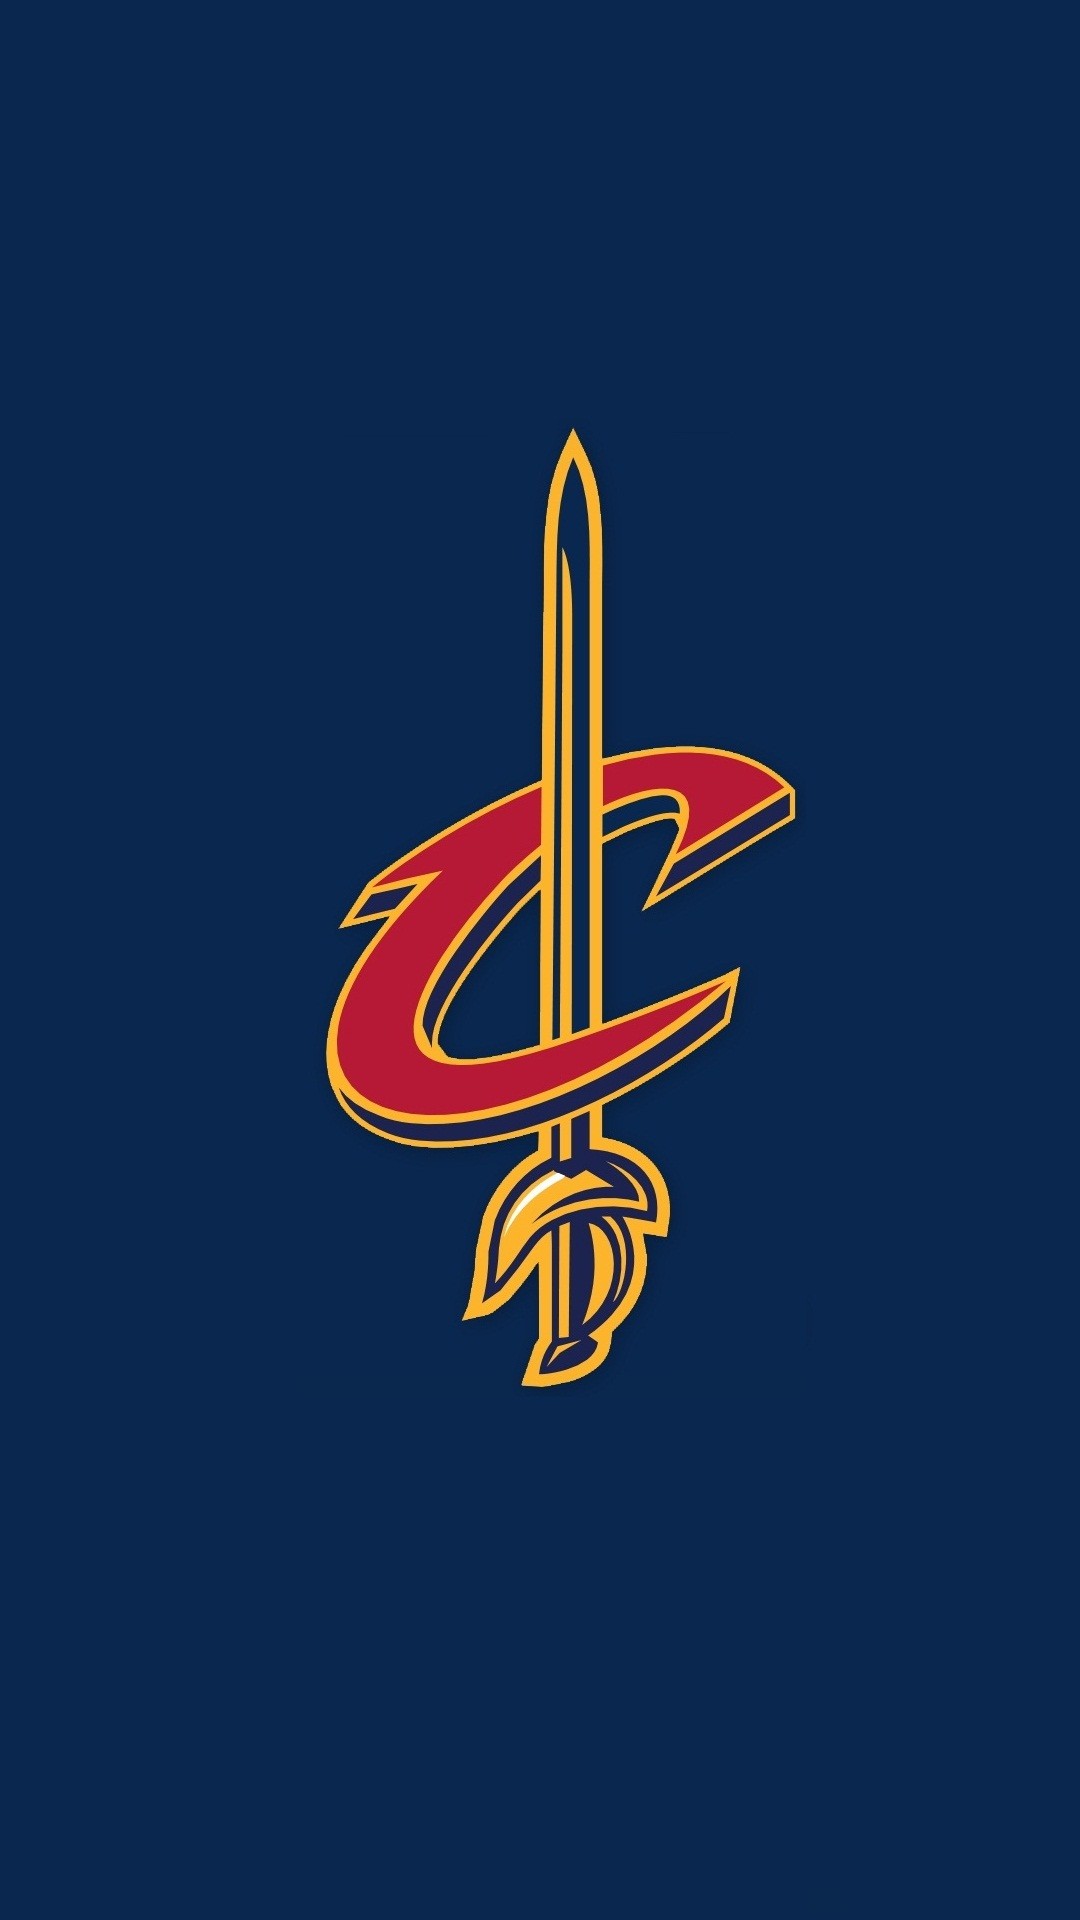 Cleveland Cavaliers Wallpaper For Android Resolution - Cleveland Cavaliers Iphone Wallpaper Hd - HD Wallpaper 